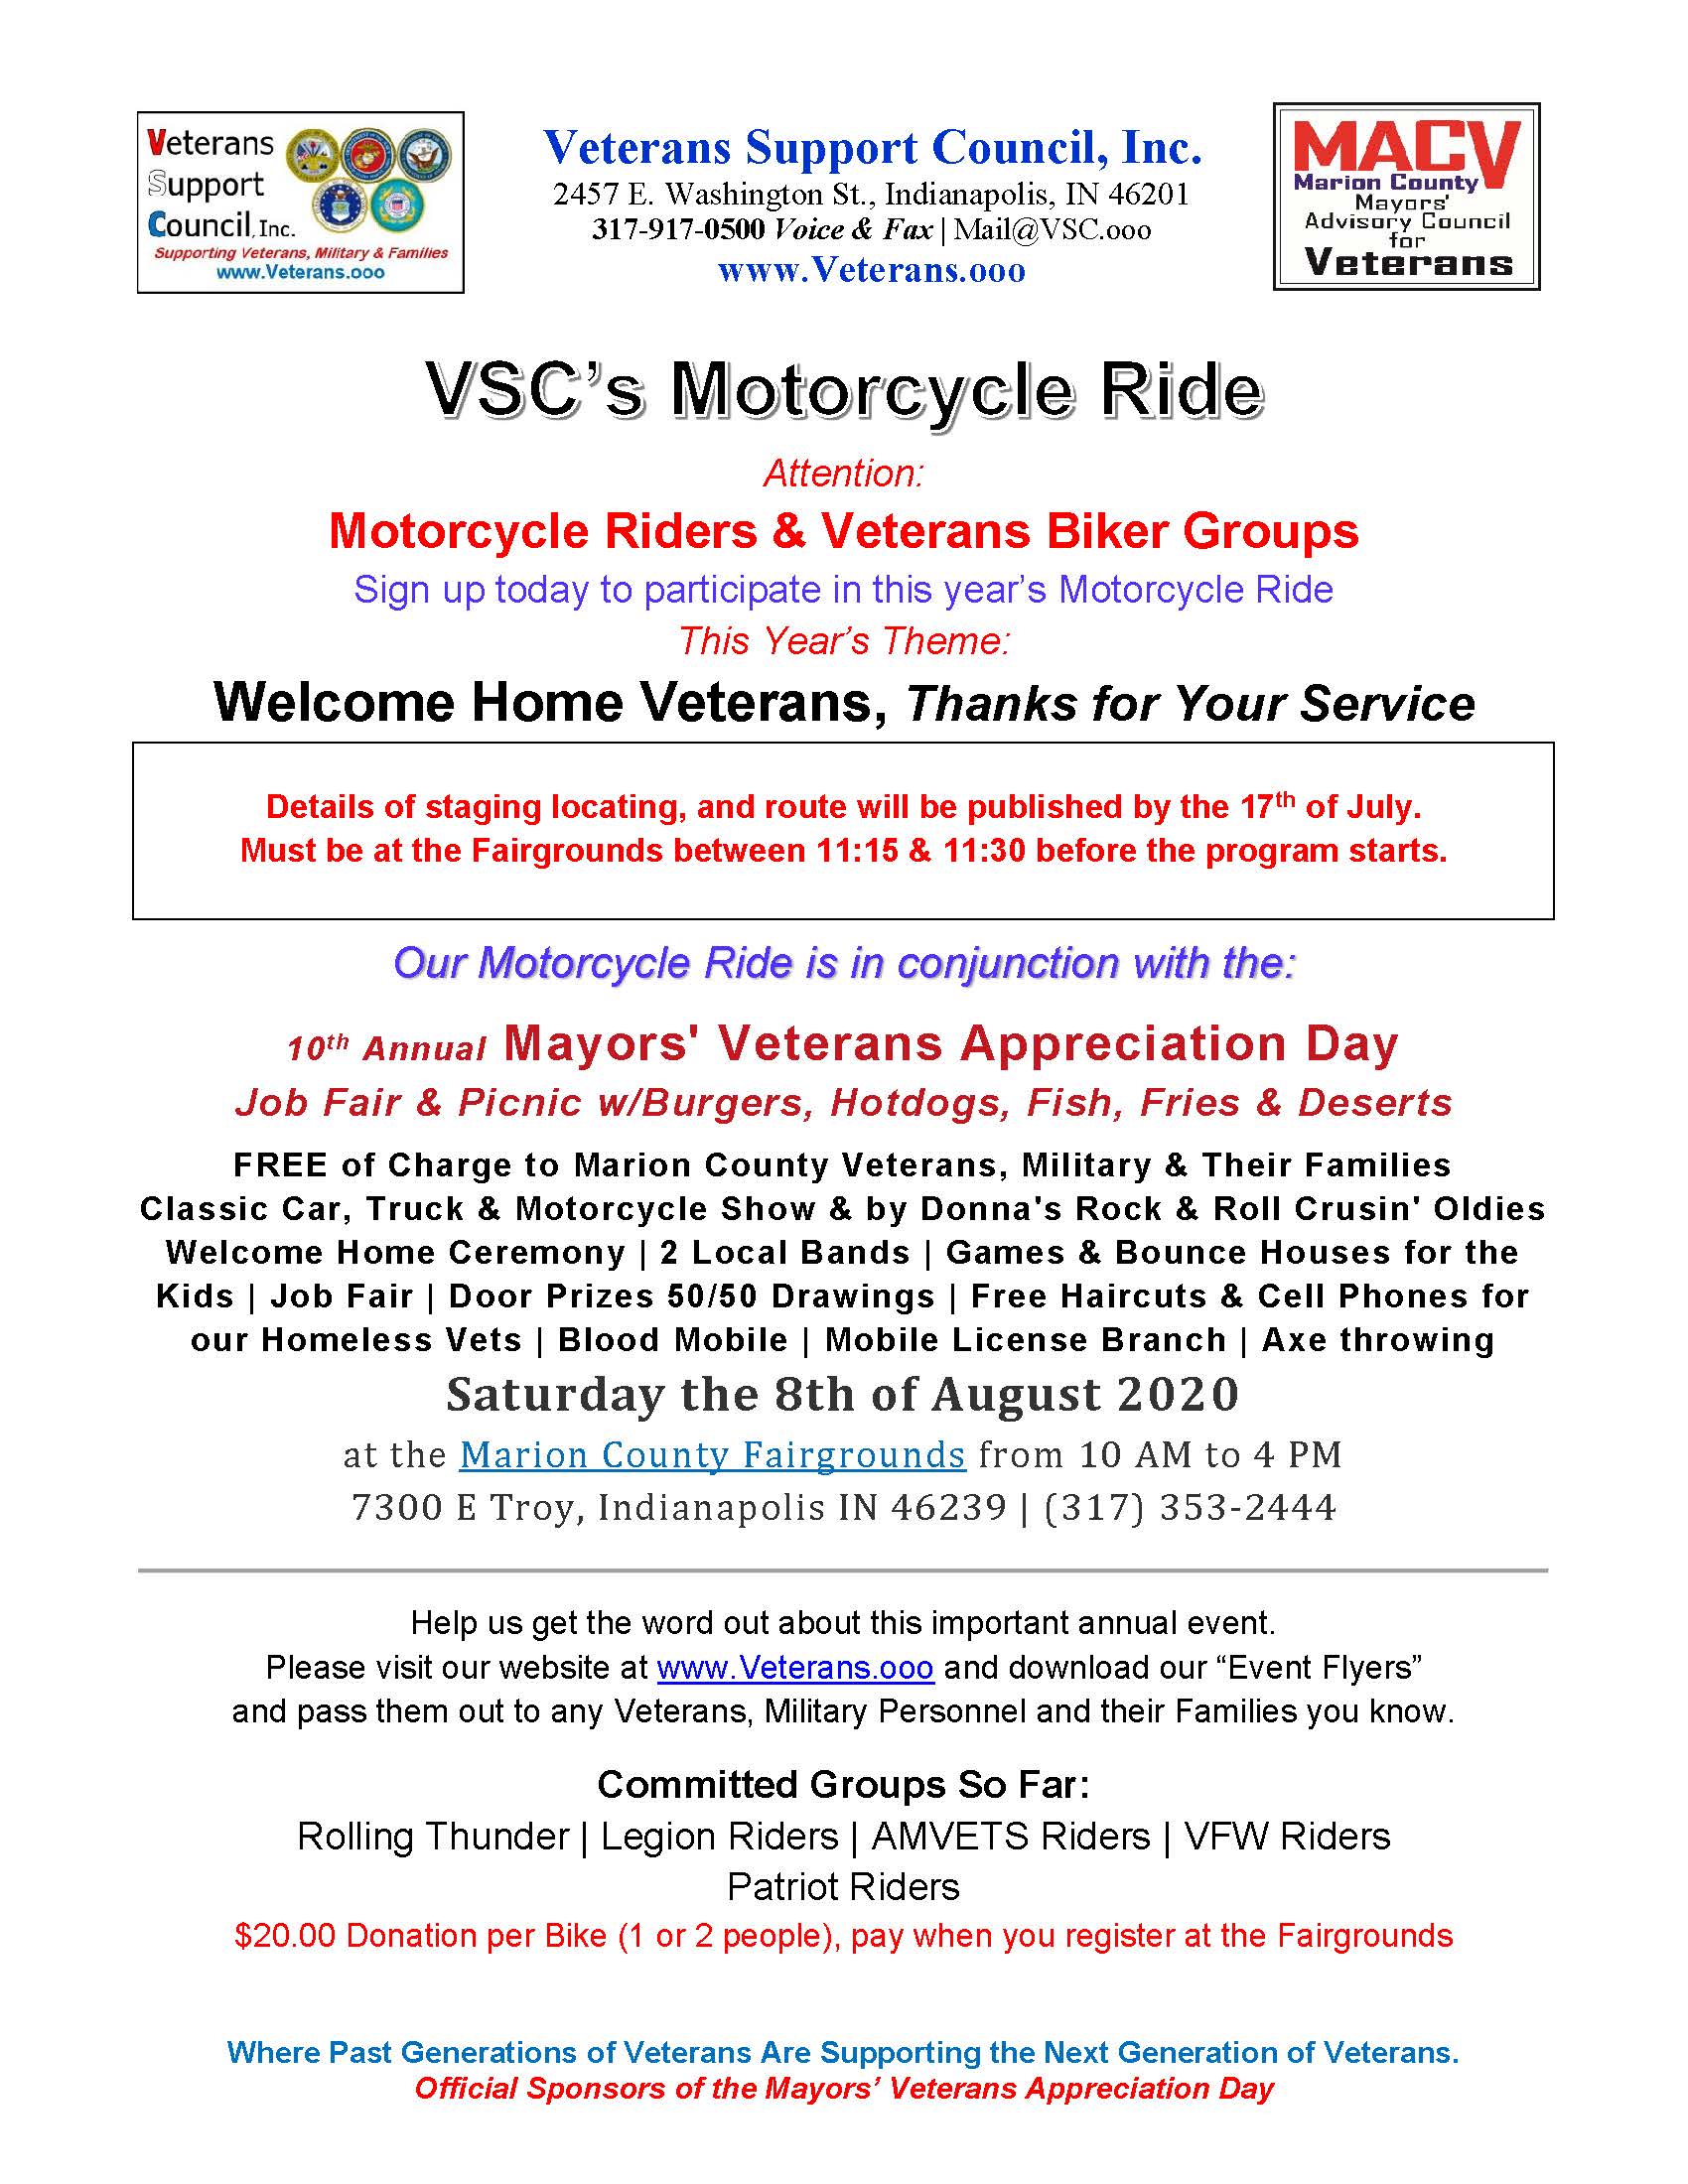 Motorcycle Ride Flyer